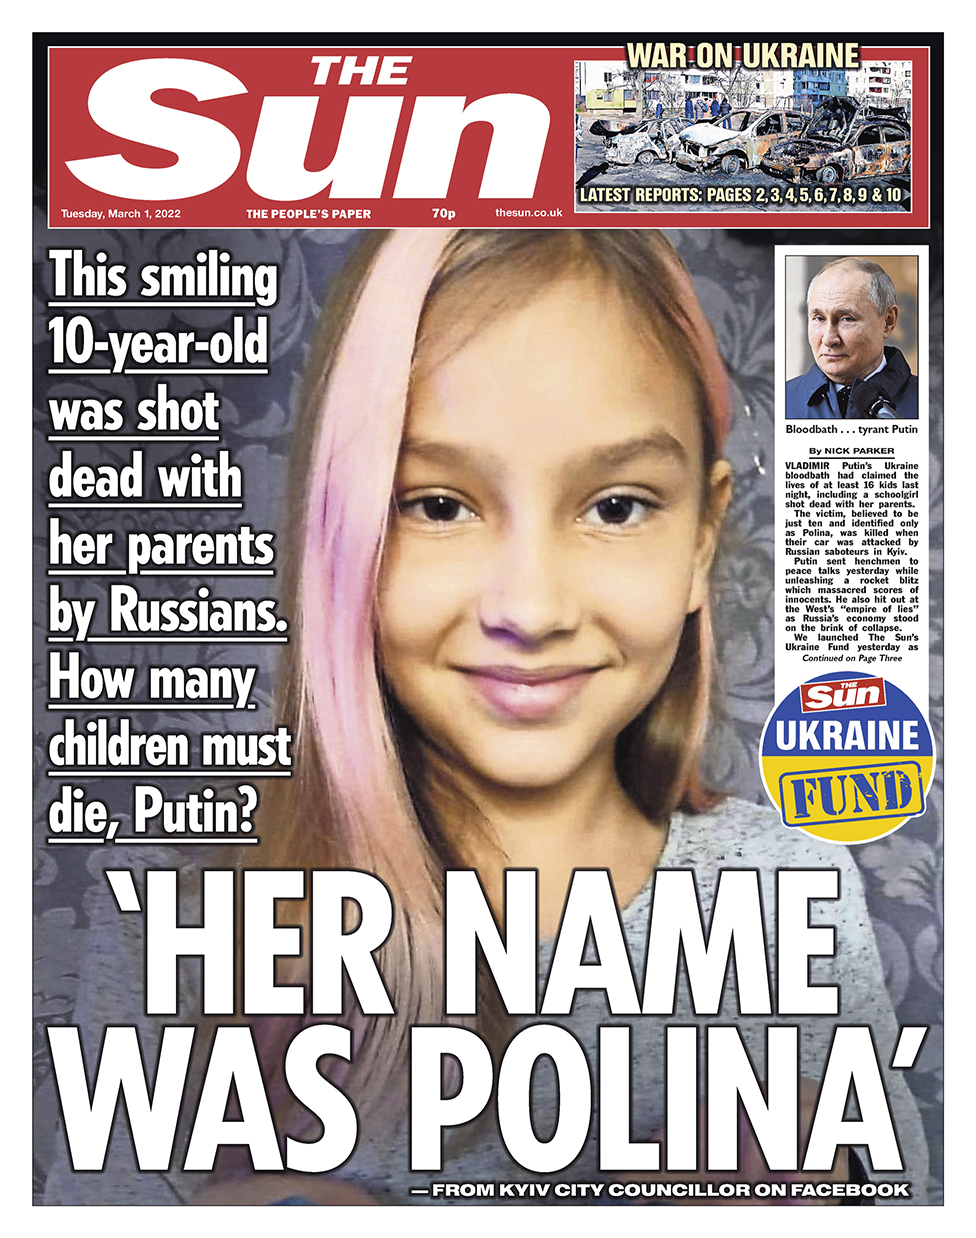 The Sun front page 01/03/22